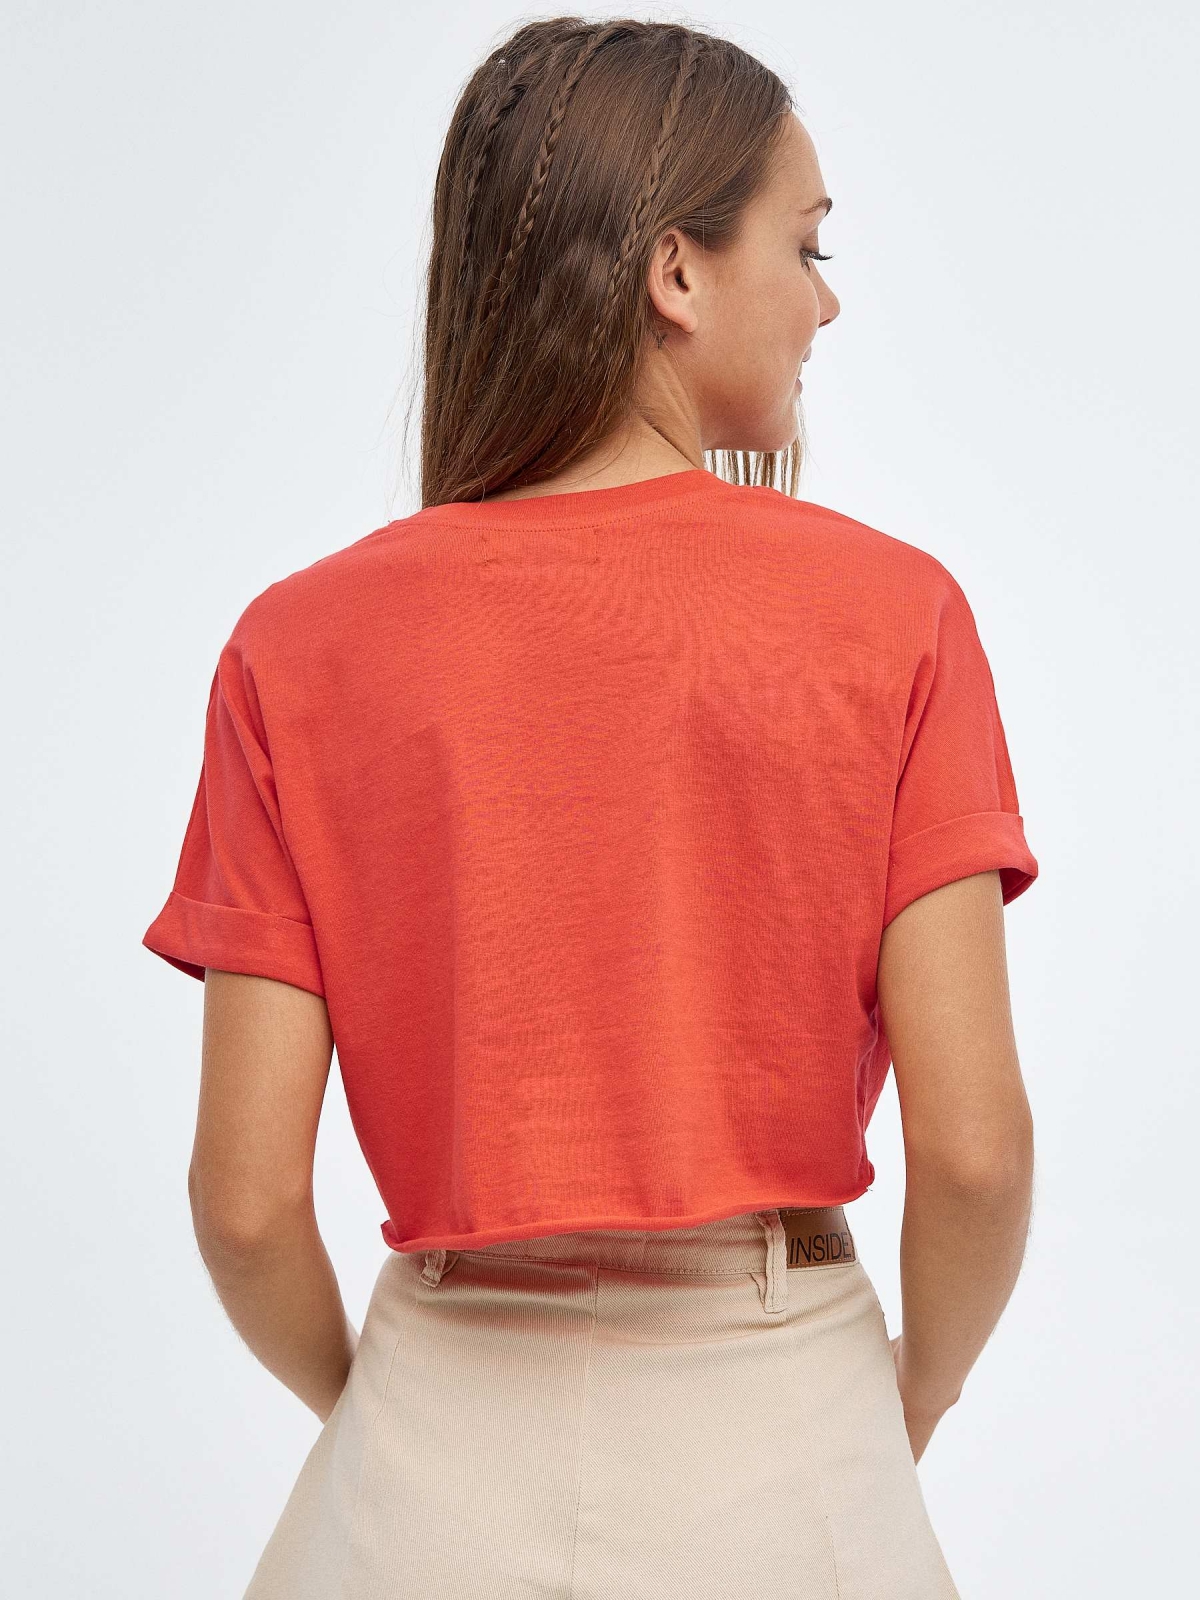 Cherry crop top red middle back view